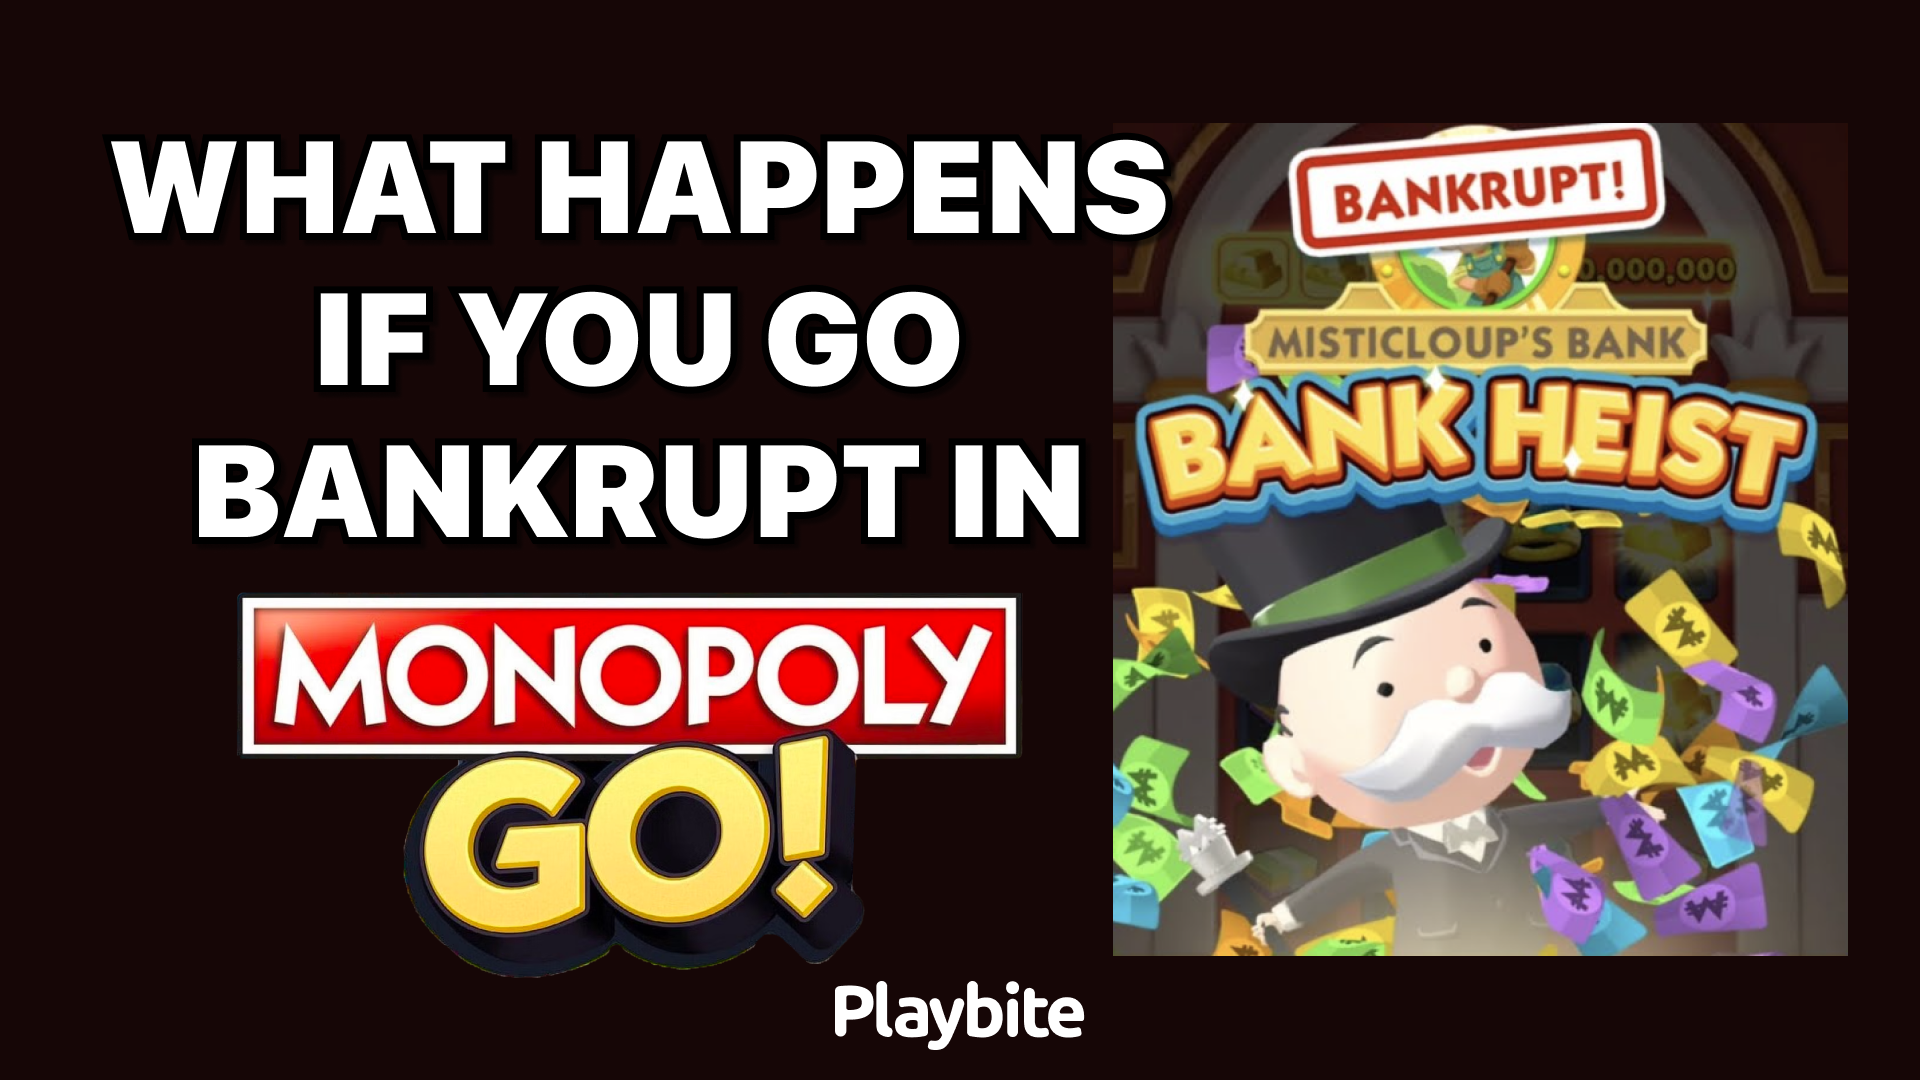 What Happens If You Go Bankrupt In Monopoly GO!